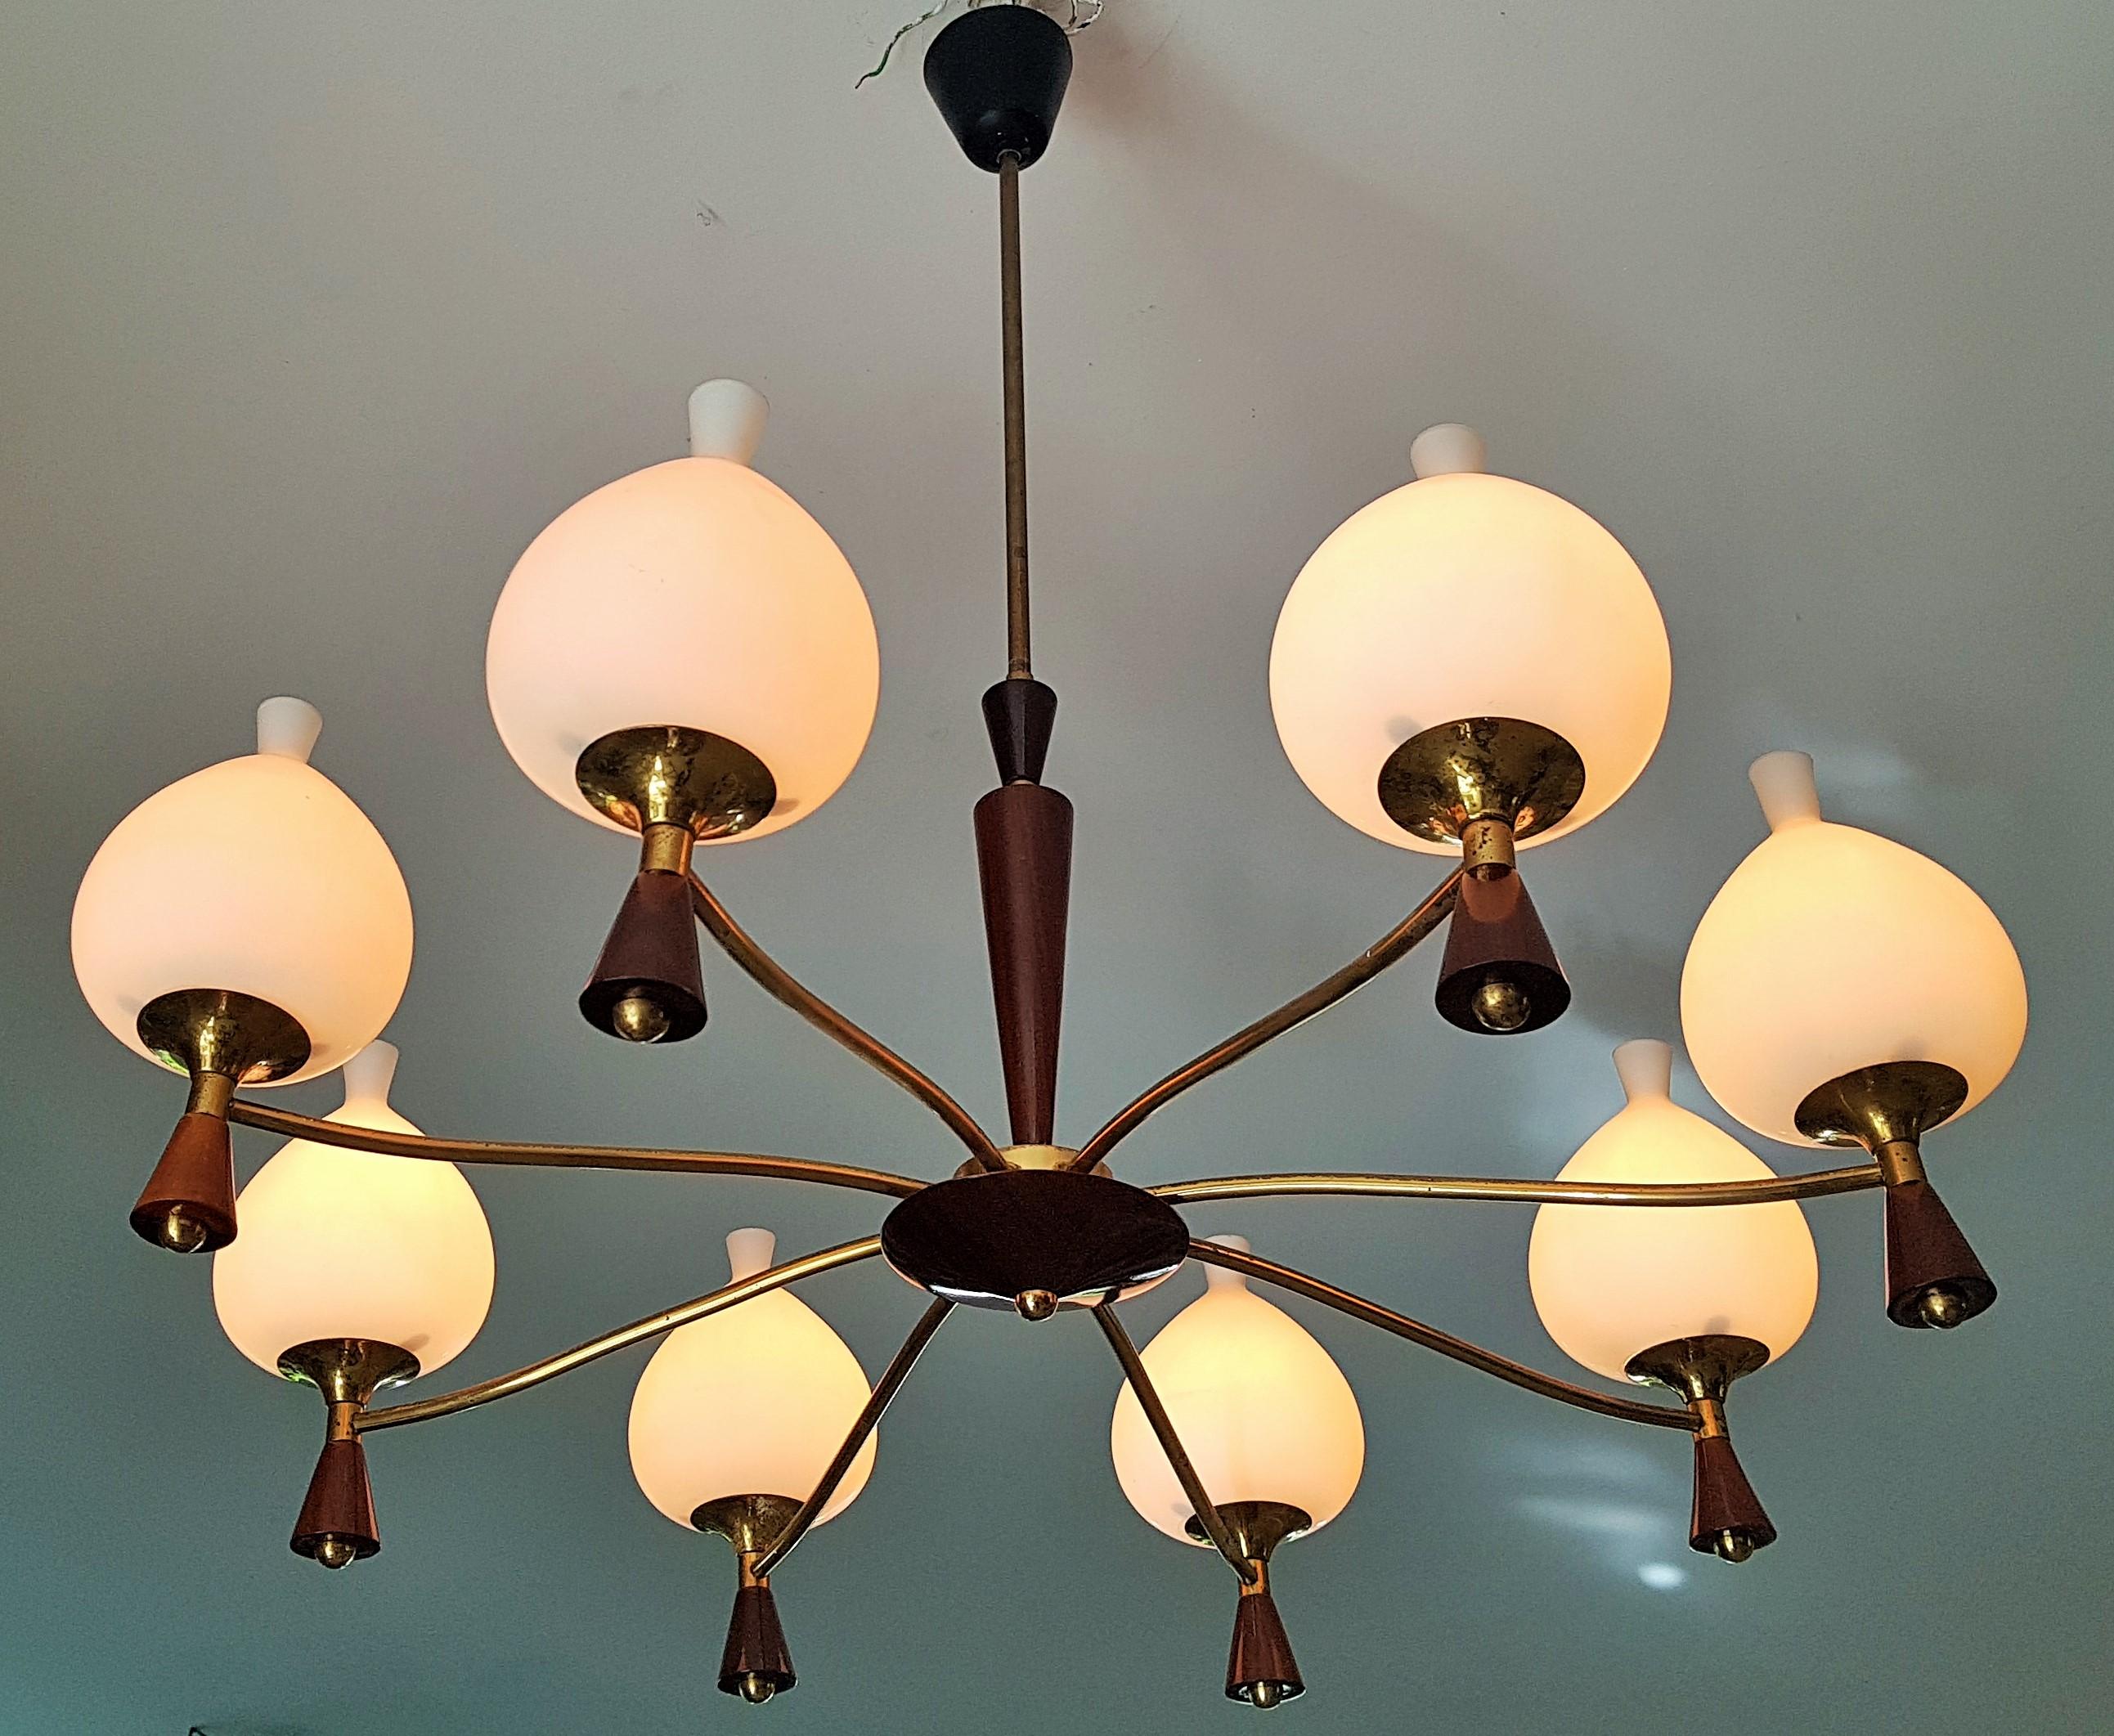 Midcentury Chandelier Style Sciolari, Brass and Wood, Italy, 1950s For Sale 3